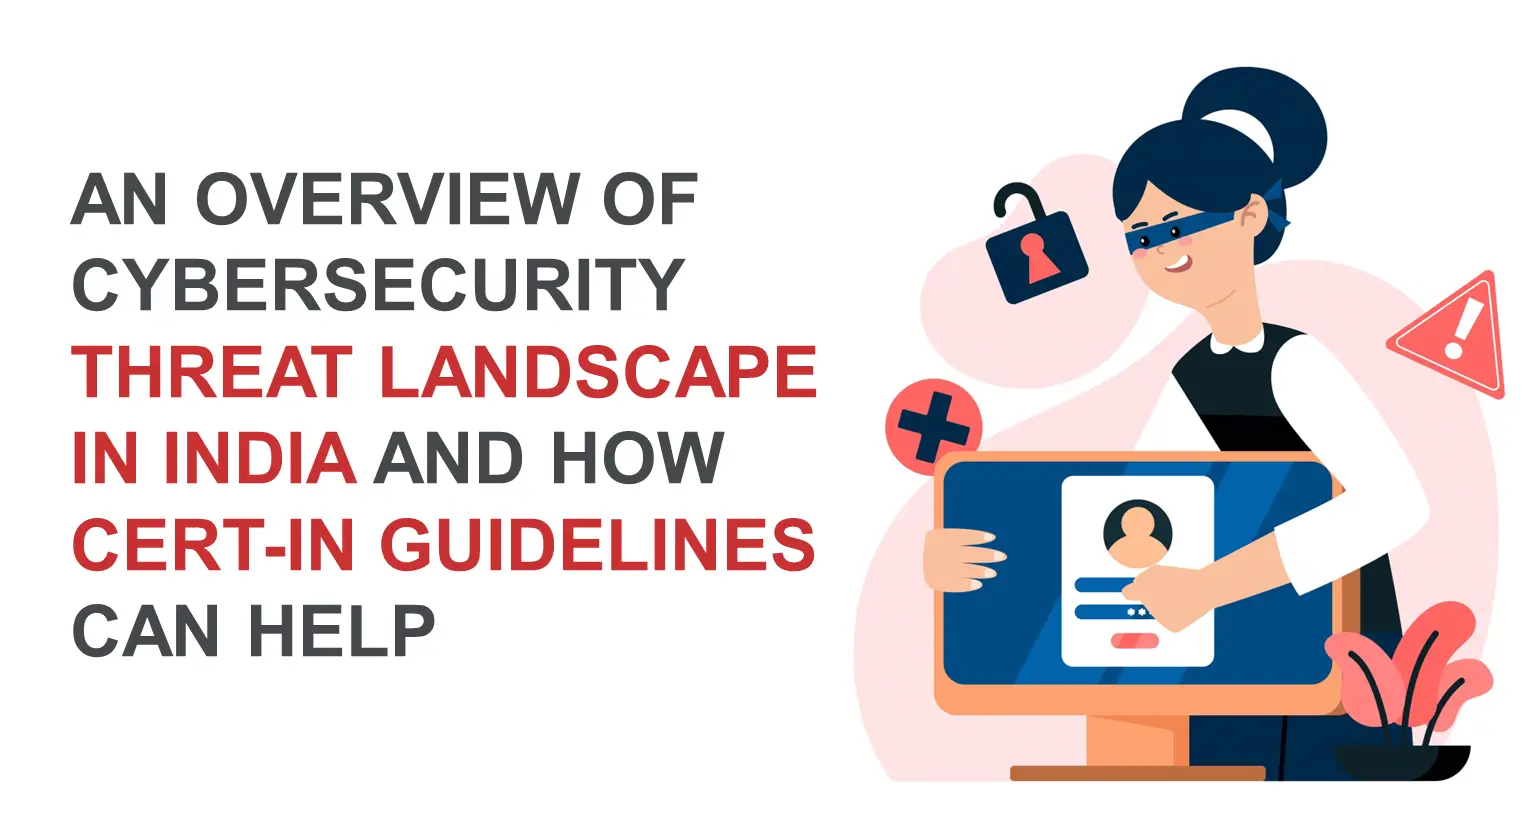 An overview of the cybersecurity threat landscape in India and how CERT-In guidelines can help